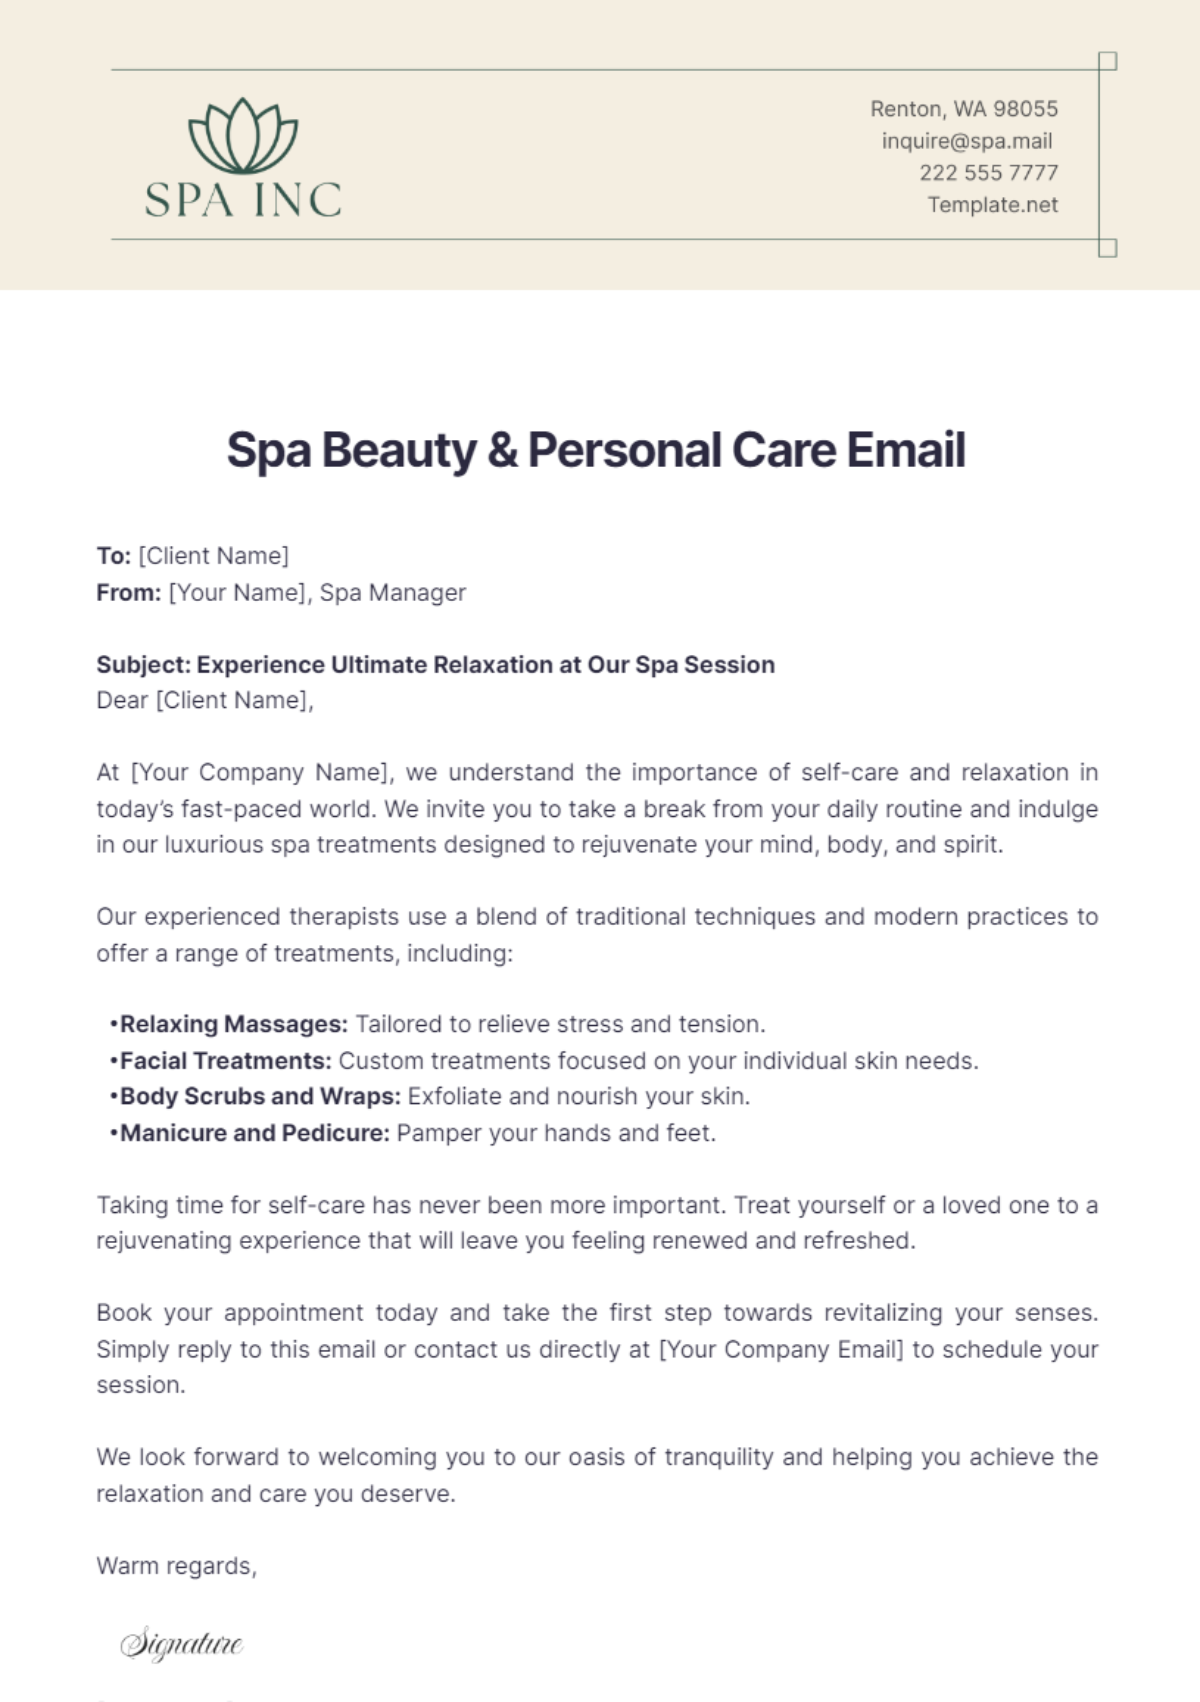 Free Spa Beauty & Personal Care Email Template